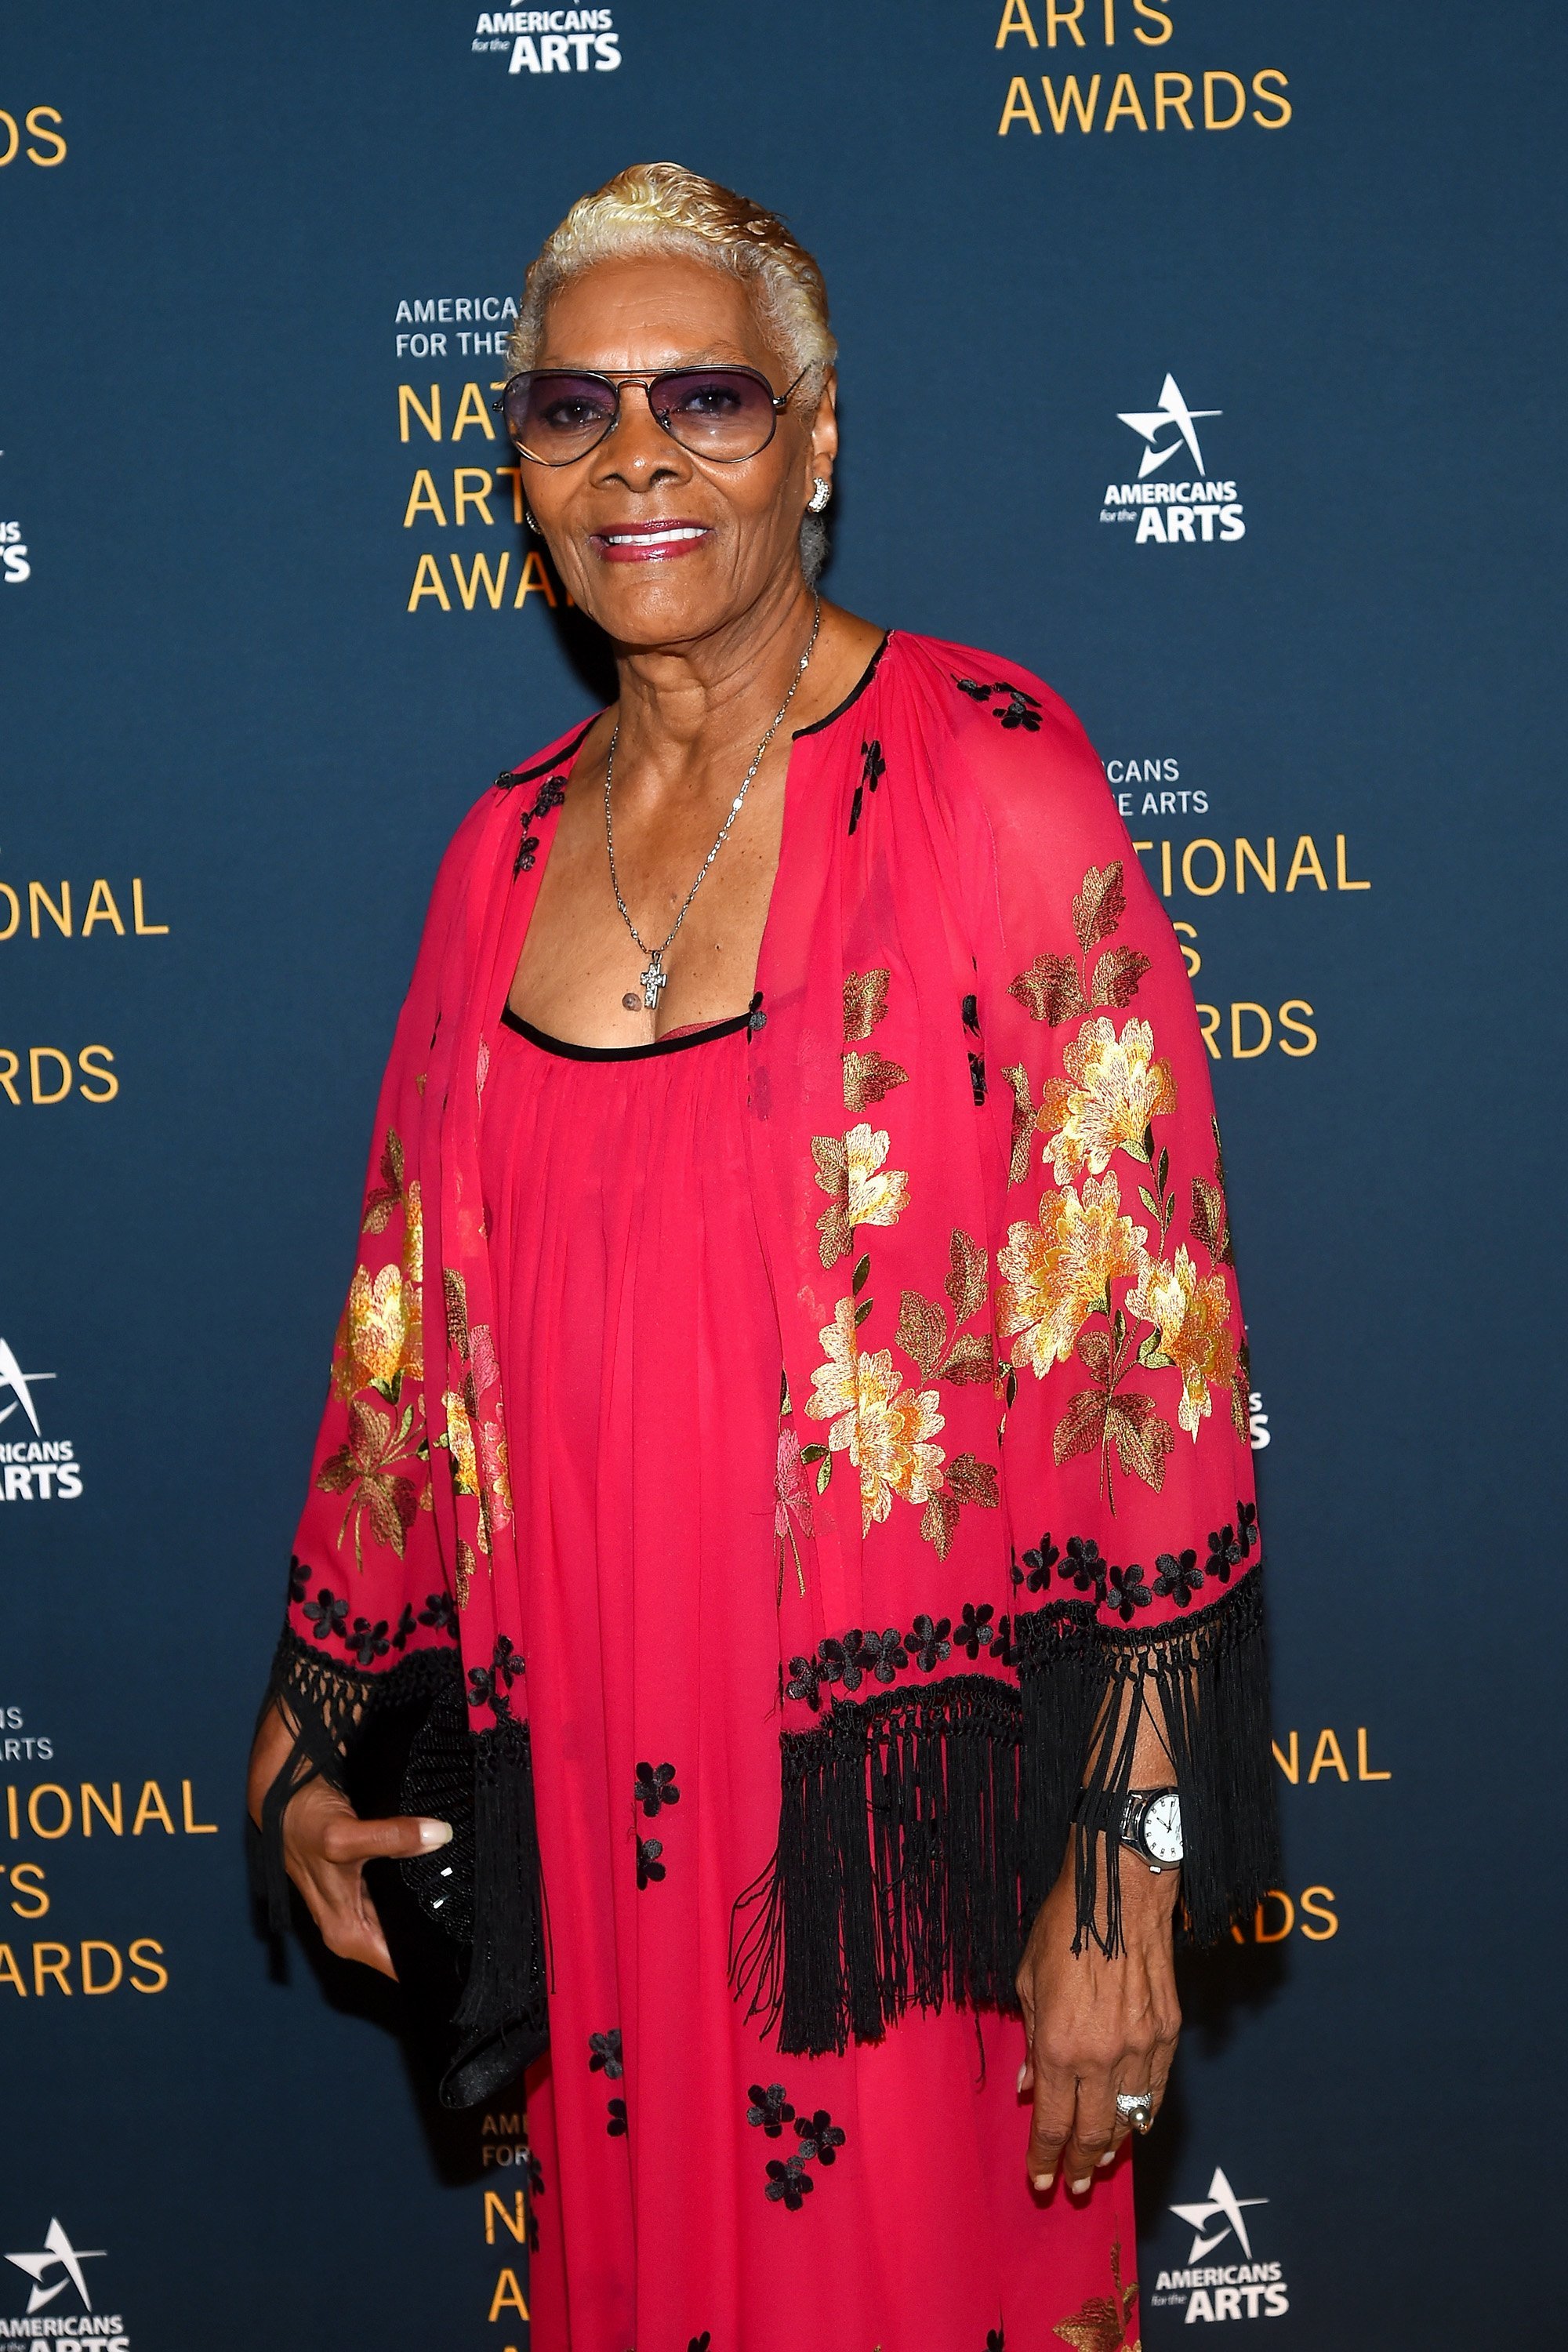 Dionne Warwick at the National Arts Awards on Oct. 23, 2017 in New York City | Photo: Getty Images